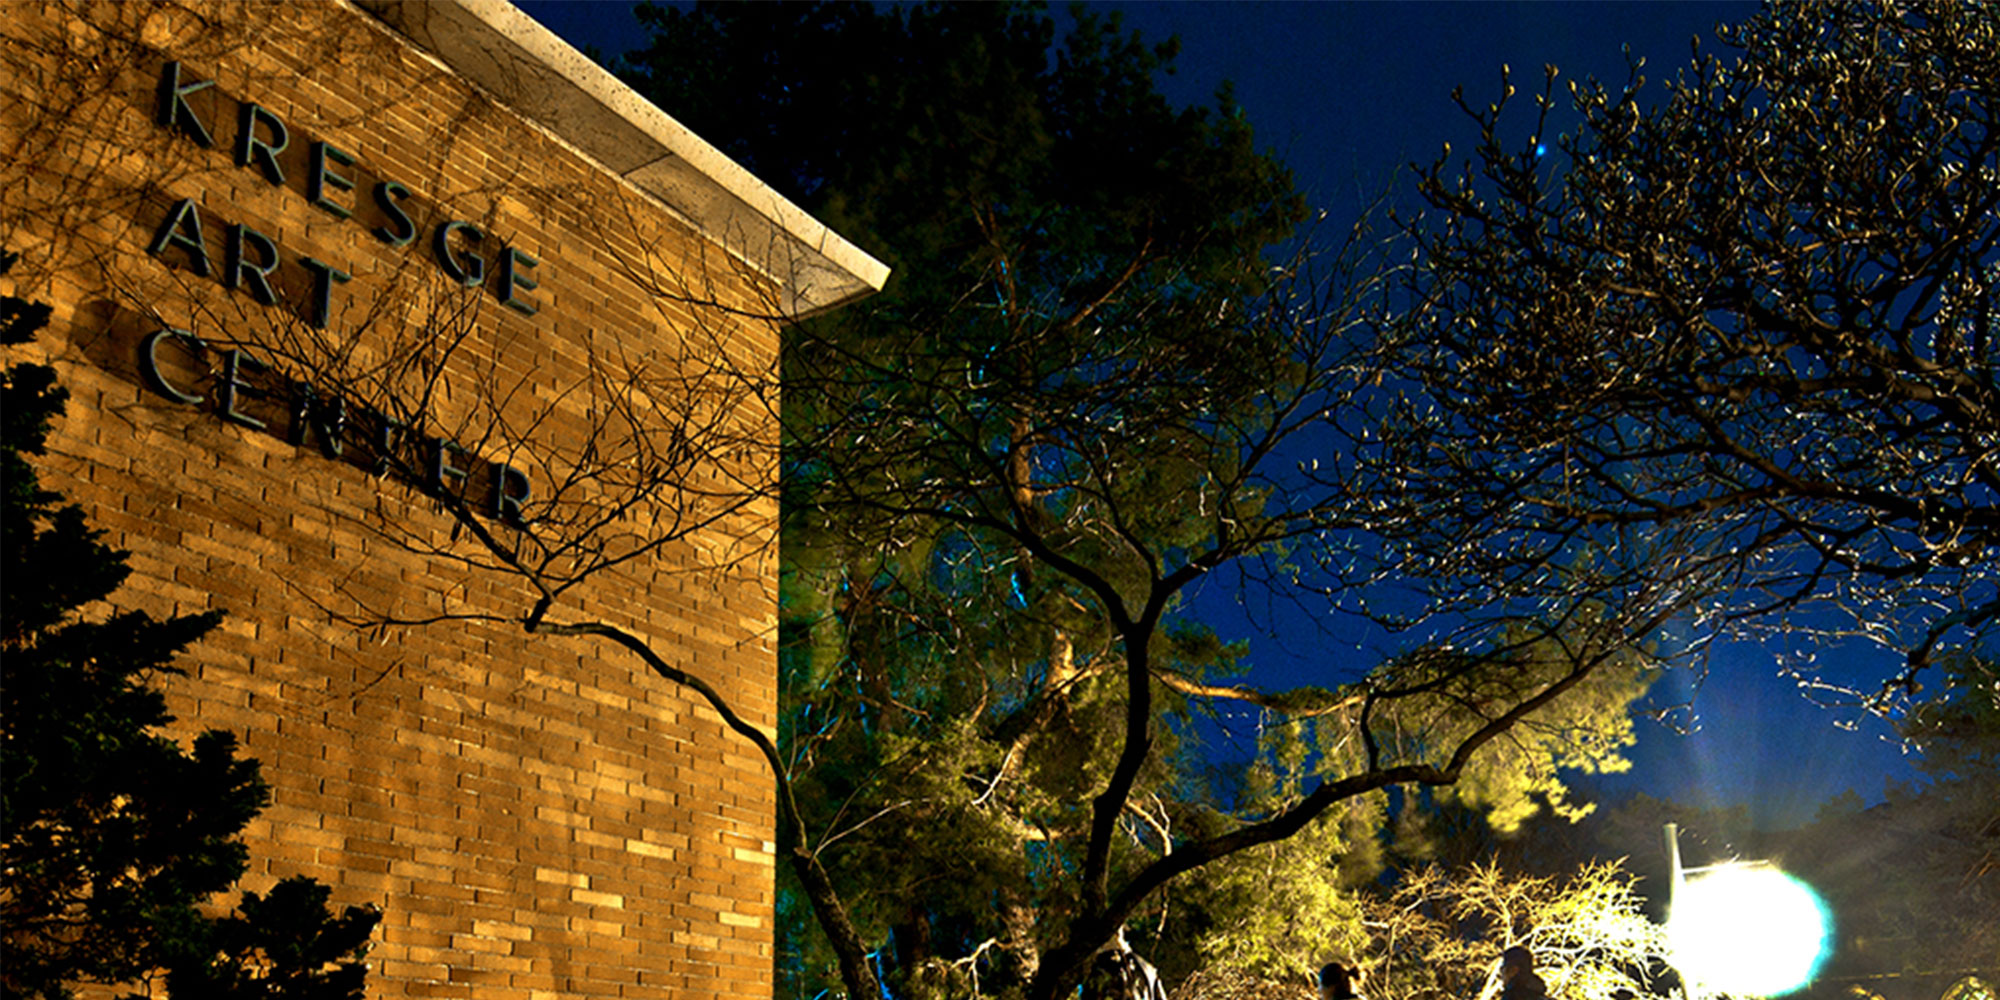 image of red brick building at night, there is lettering on the building that says 'kresge art center'